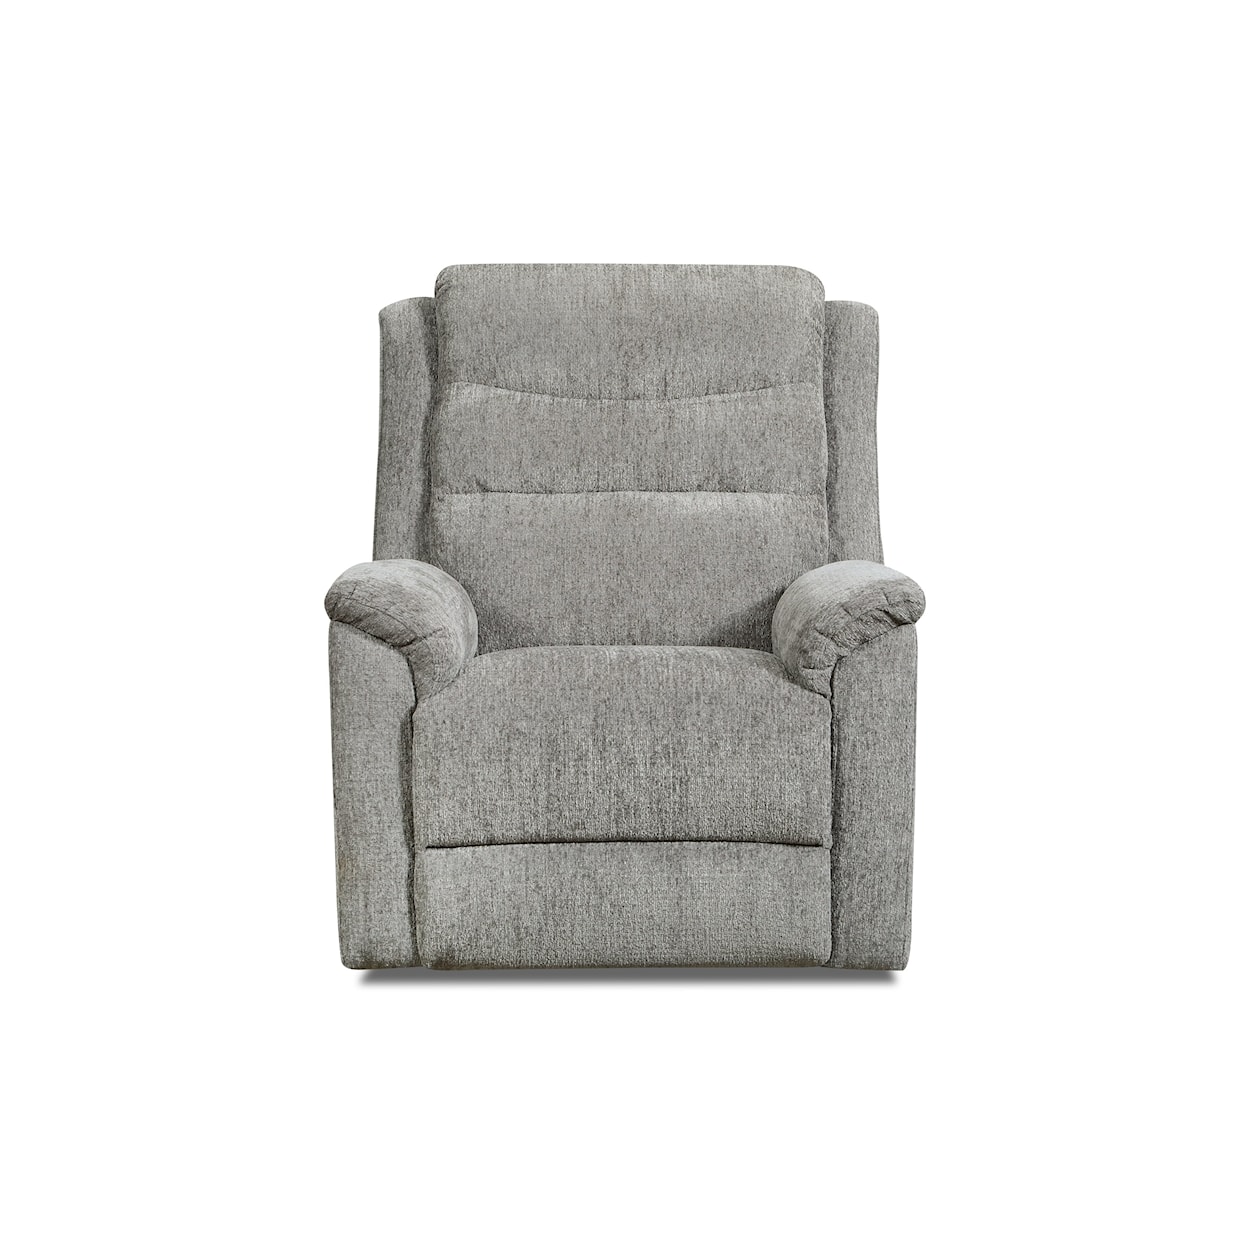 Behold Home 7578 Abington Charcoal- Warehouse Glider Recliner